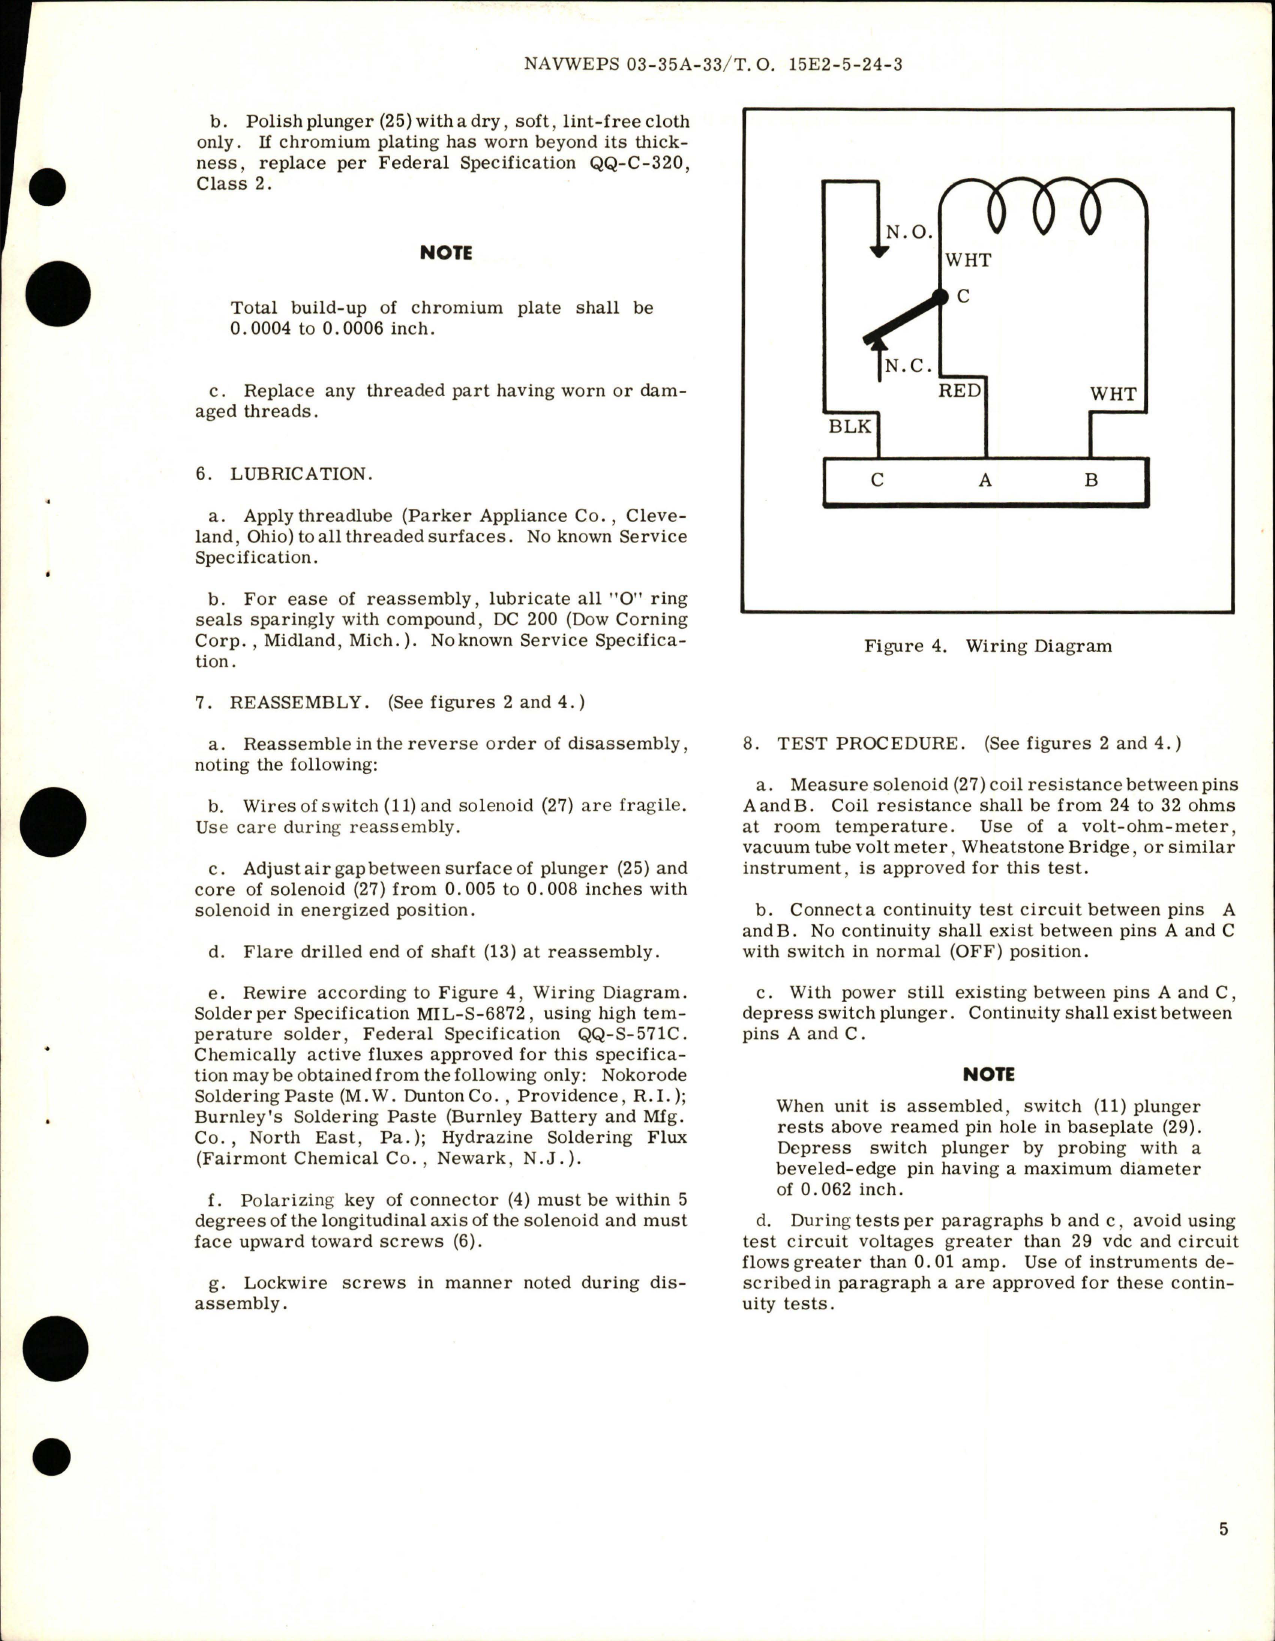 Sample page 5 from AirCorps Library document: Overhaul Instructions with Parts Breakdown for Air Shut-Off Valve Actuator - Part 124669